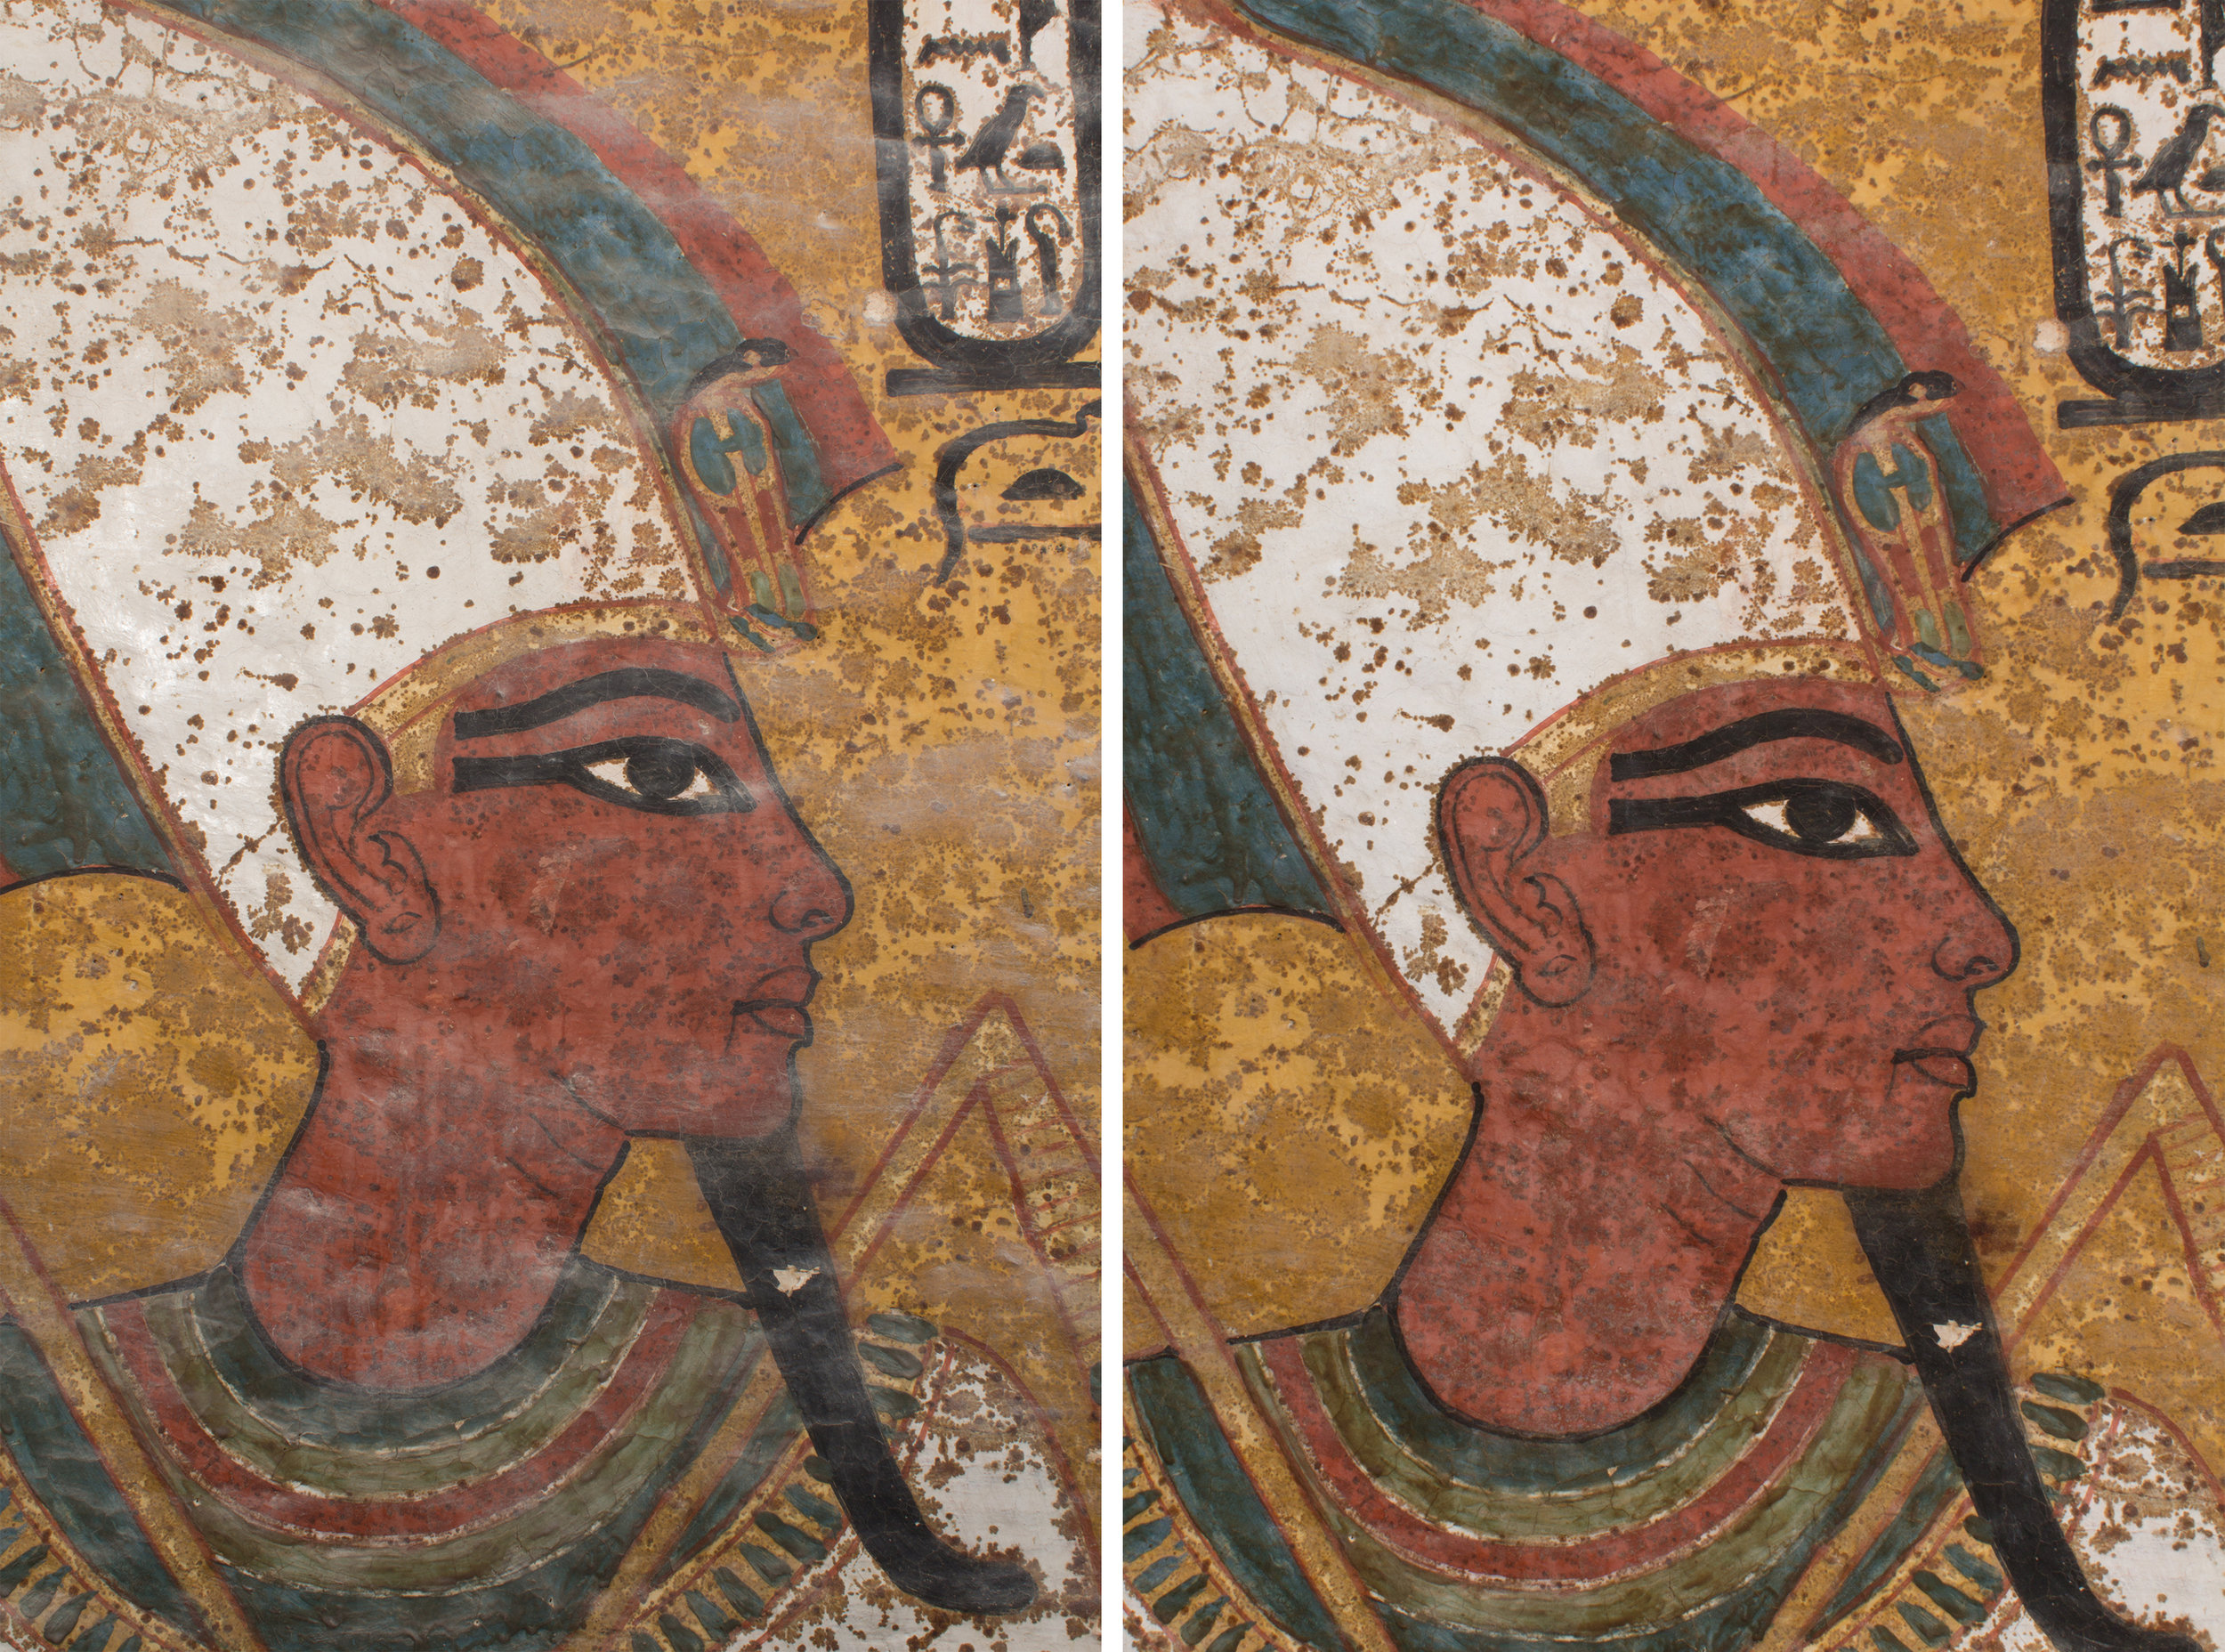  The wall painting before (left) and after (right) dust reduction.&nbsp;  Image © J. Paul Getty Trust, 2016 